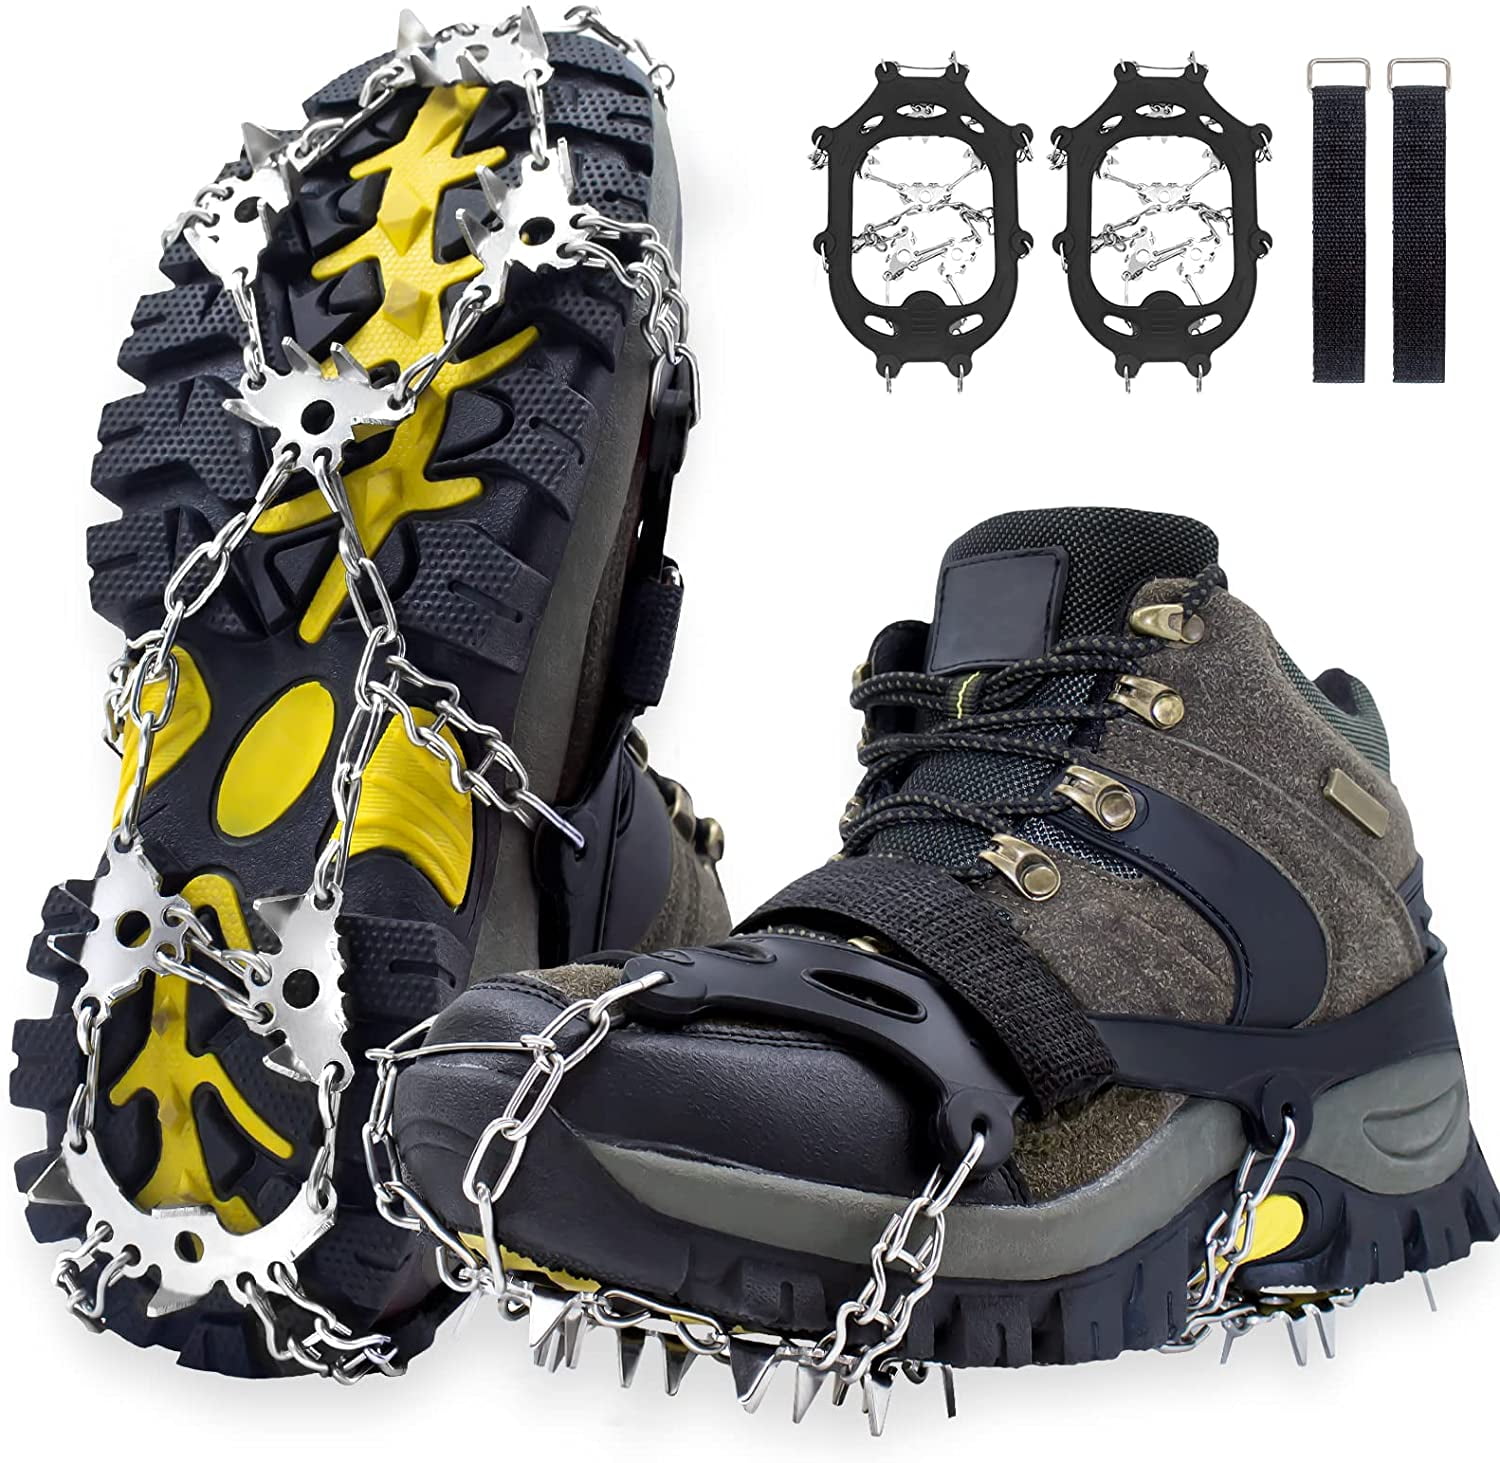 Toasis Ice Claws Snow Grips Spikes Crampons Traction Cleats for Shoes Boots 